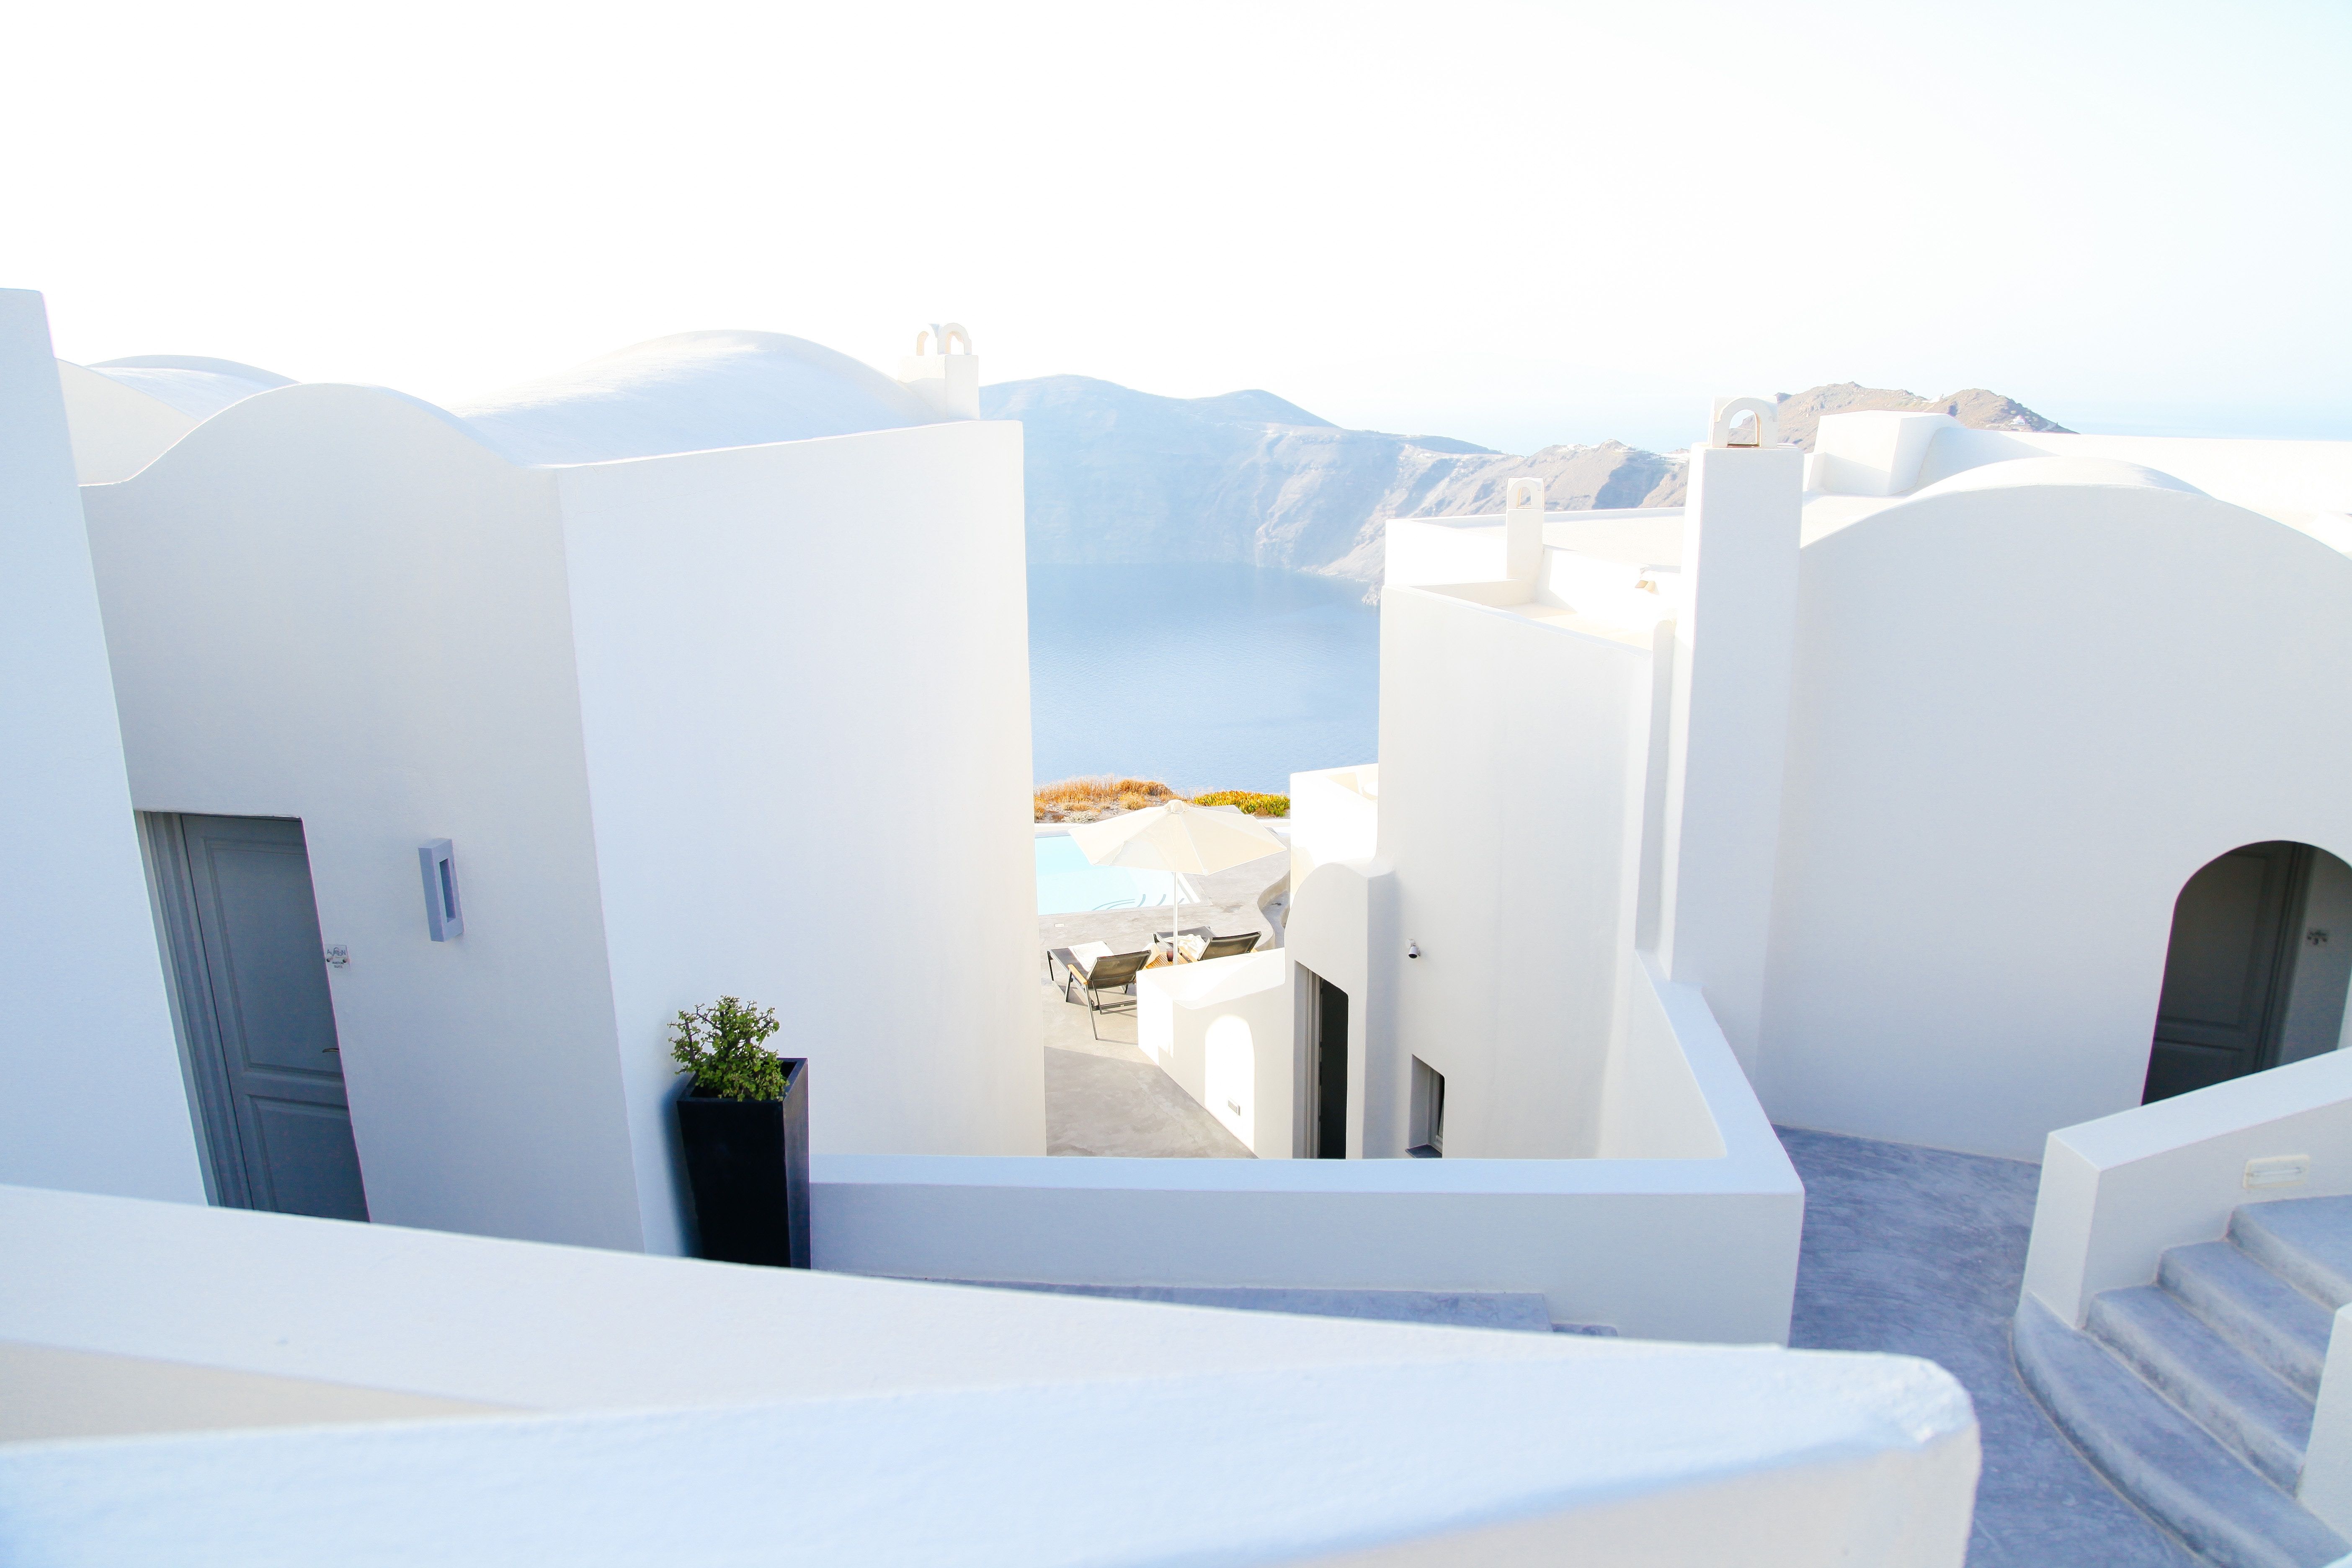 5616x3744 #sea, #greece, #home, #white, #building, #minimal, #house, #motel, #light, #water, #minimalist, #room, #plant, #bright, #architecture, #architeture, #land, #lake, #aesthetic, #PNG image, #hotel. Mocah.org HD Wallpaper